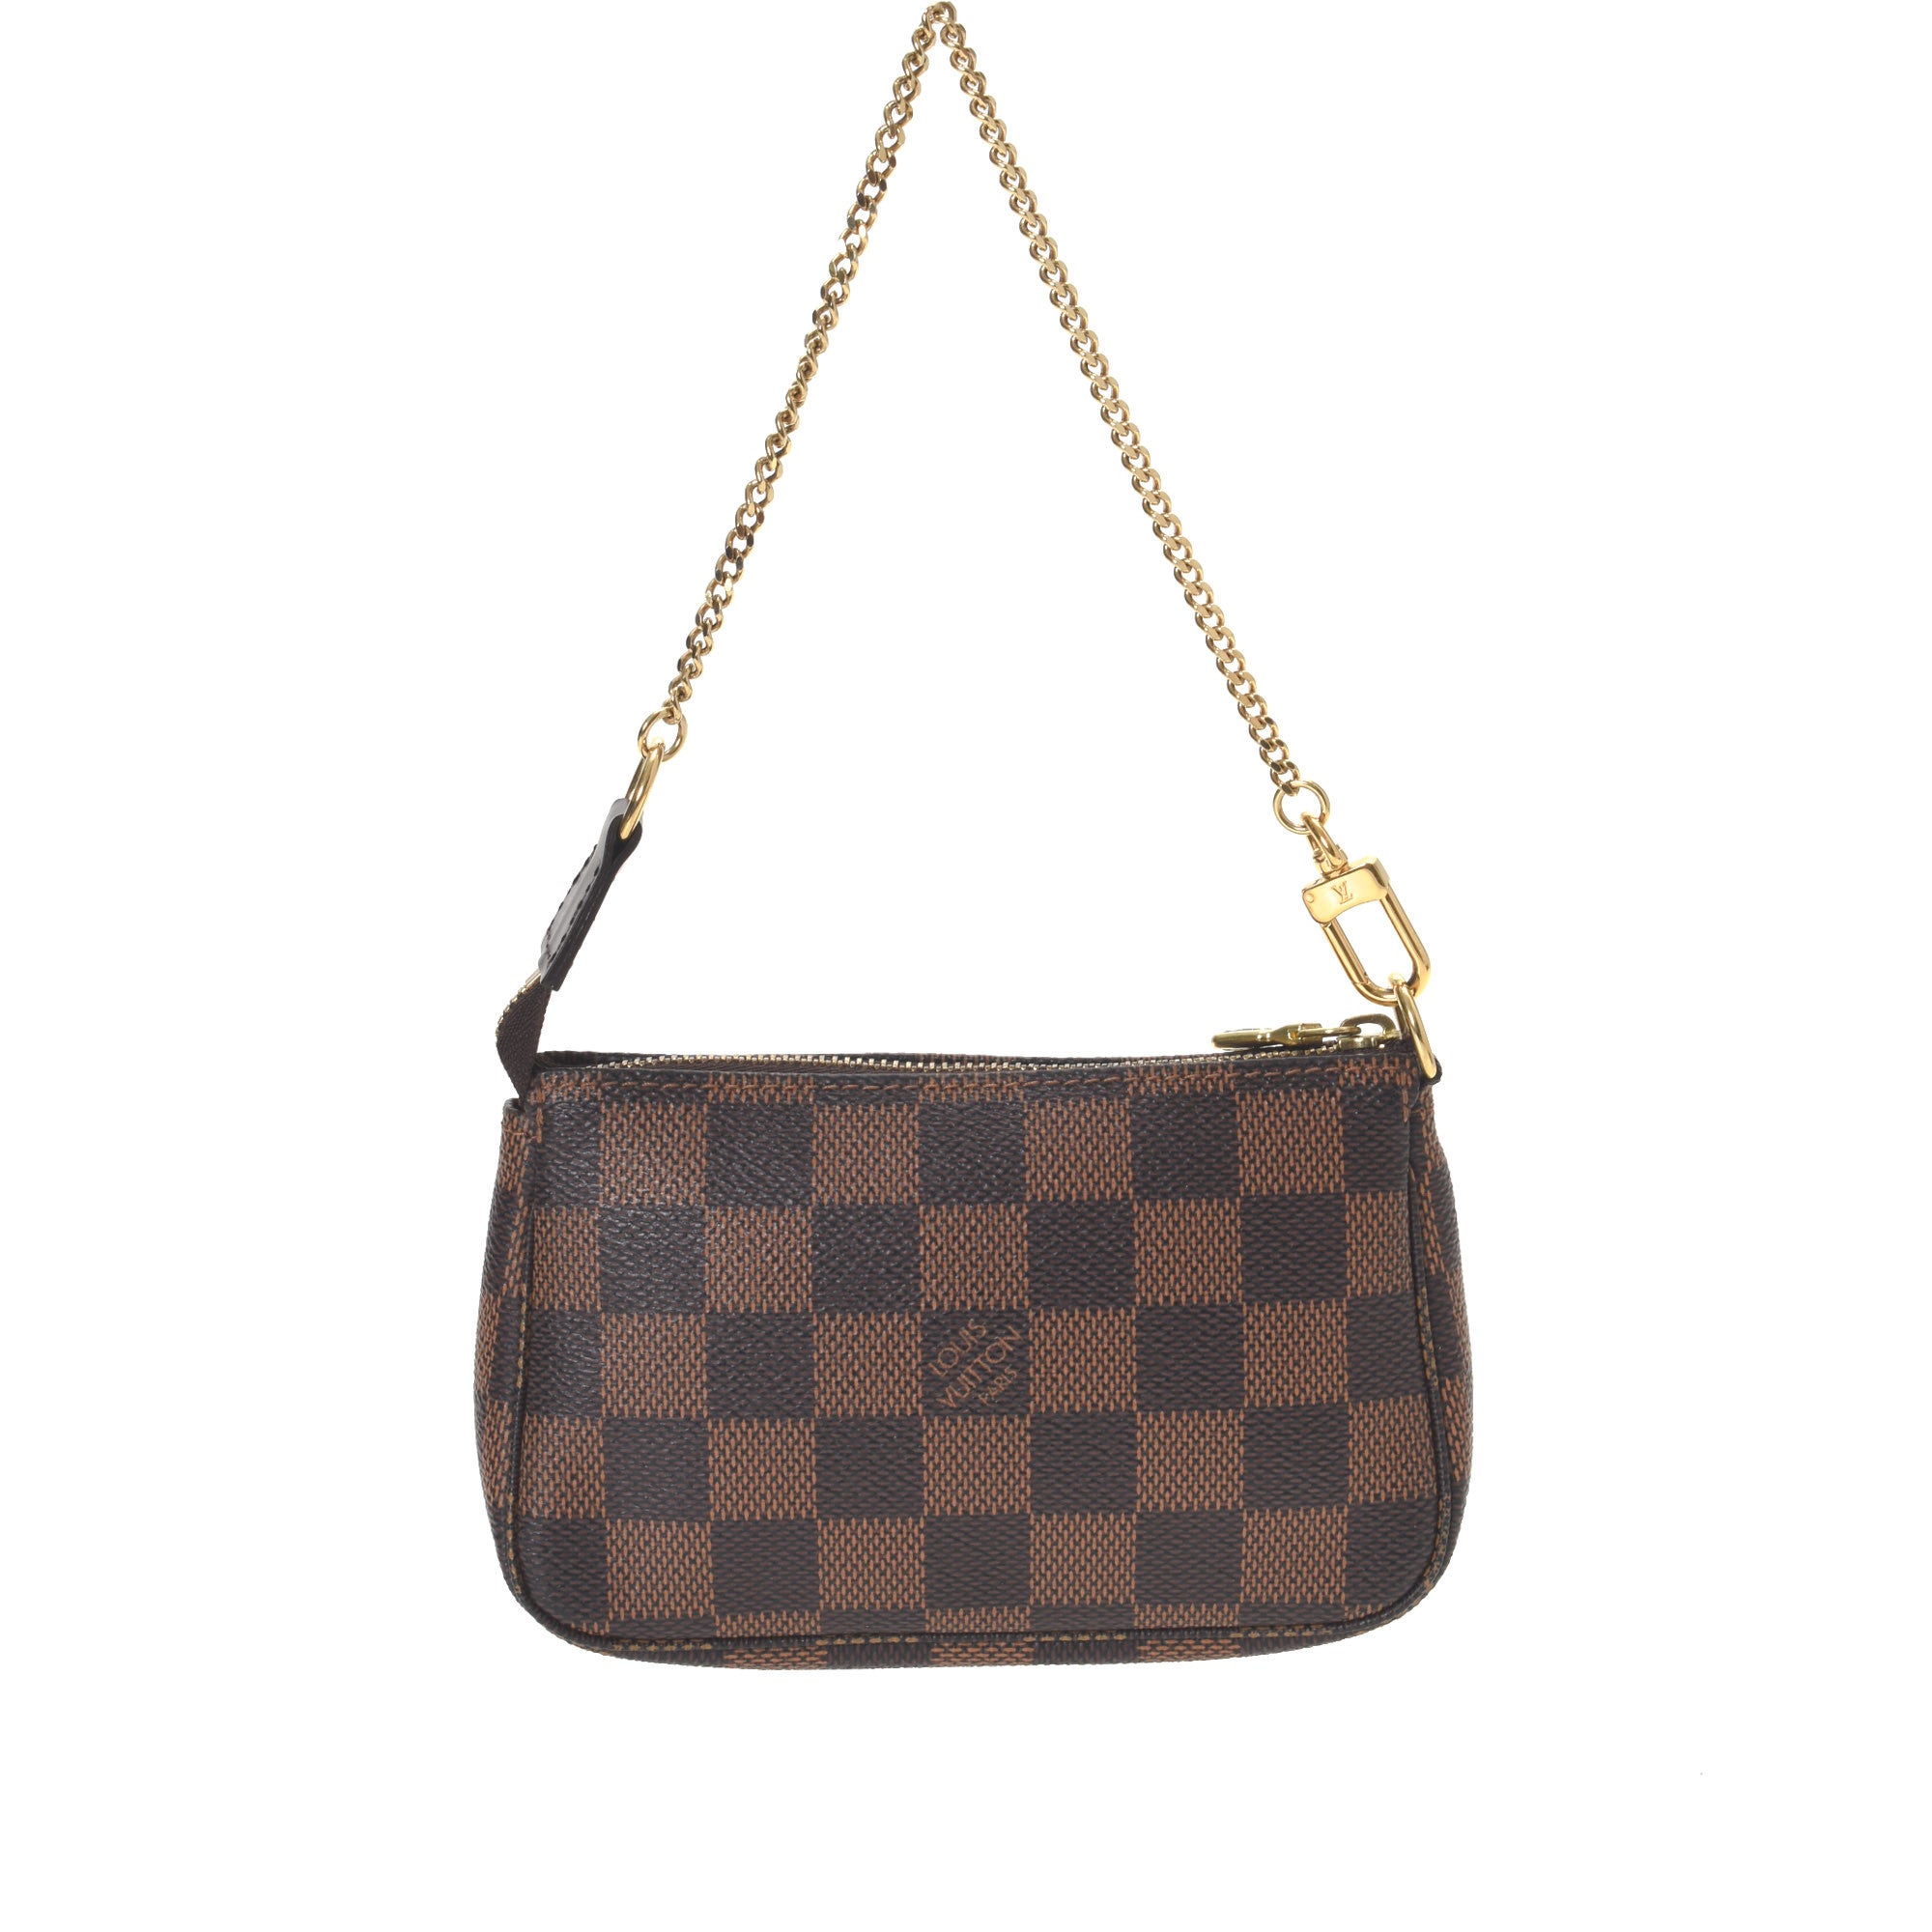 Louis Vuitton - Authenticated Pochette Accessoire Clutch Bag - Leather Brown for Women, Very Good Condition